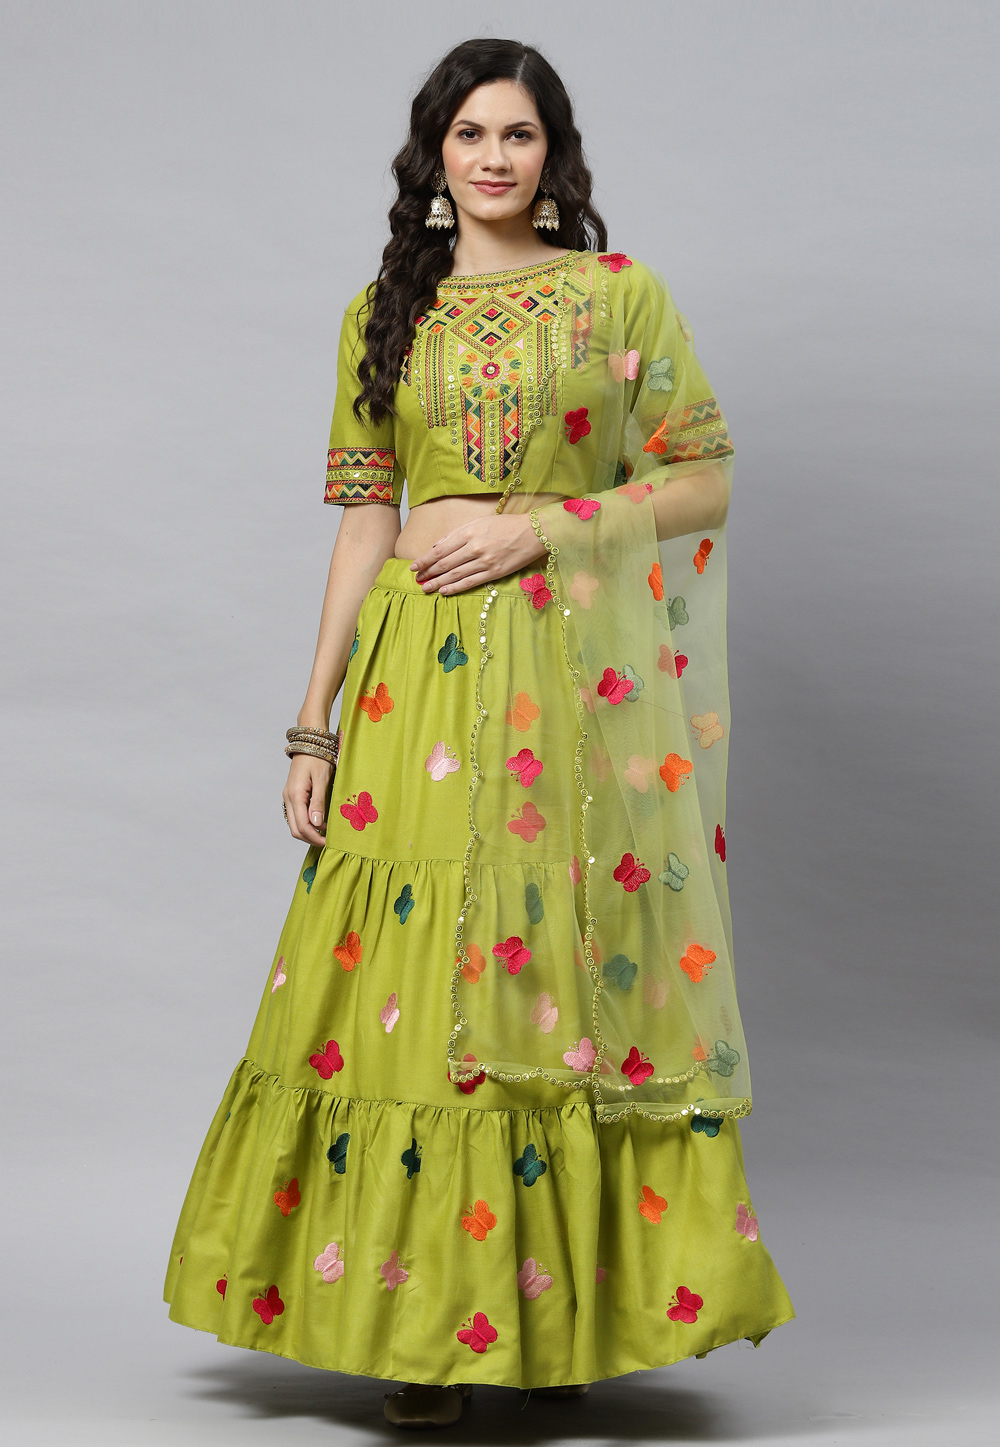 Buy Parrot Green Designer Heavy Embroidered Wedding Lehenega Choli |  Wedding Lehenega Choli